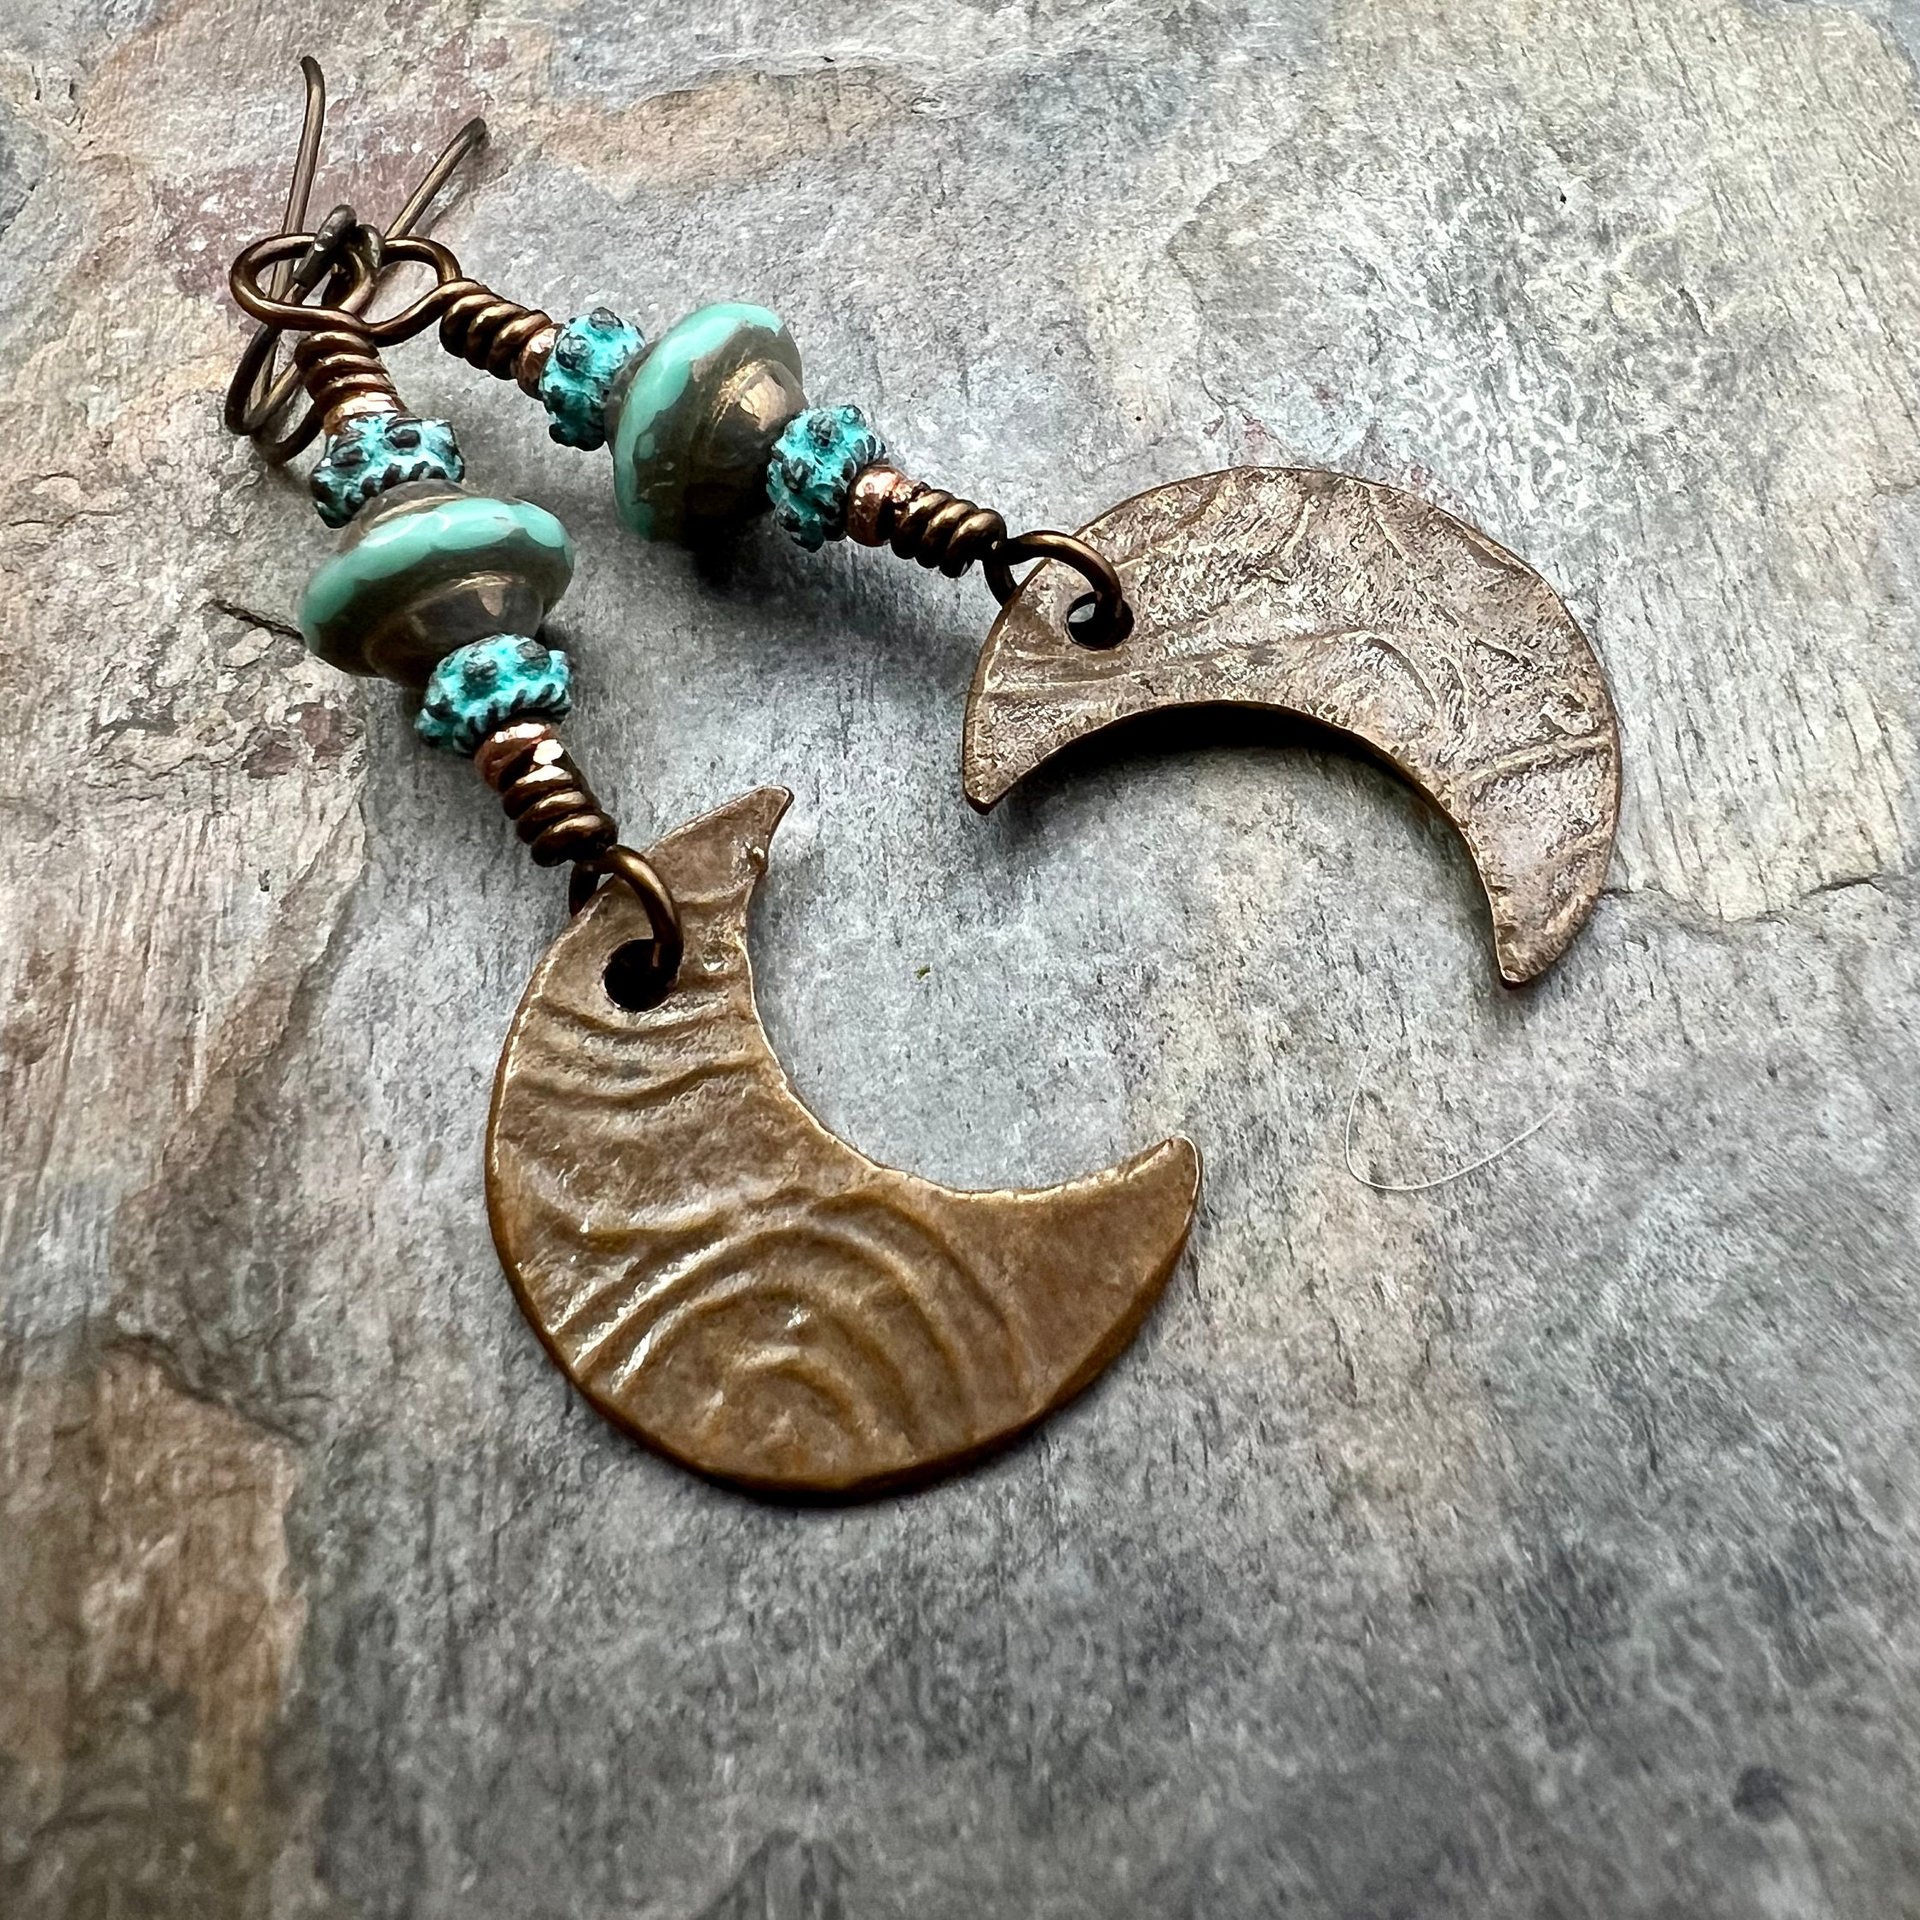 Crescent Moon Earrings, Copper Moon, Celestial Jewelry, Celtic Spirals, Witch Earrings, Pagan Spiritual, Crystal Beads, Moon Goddess